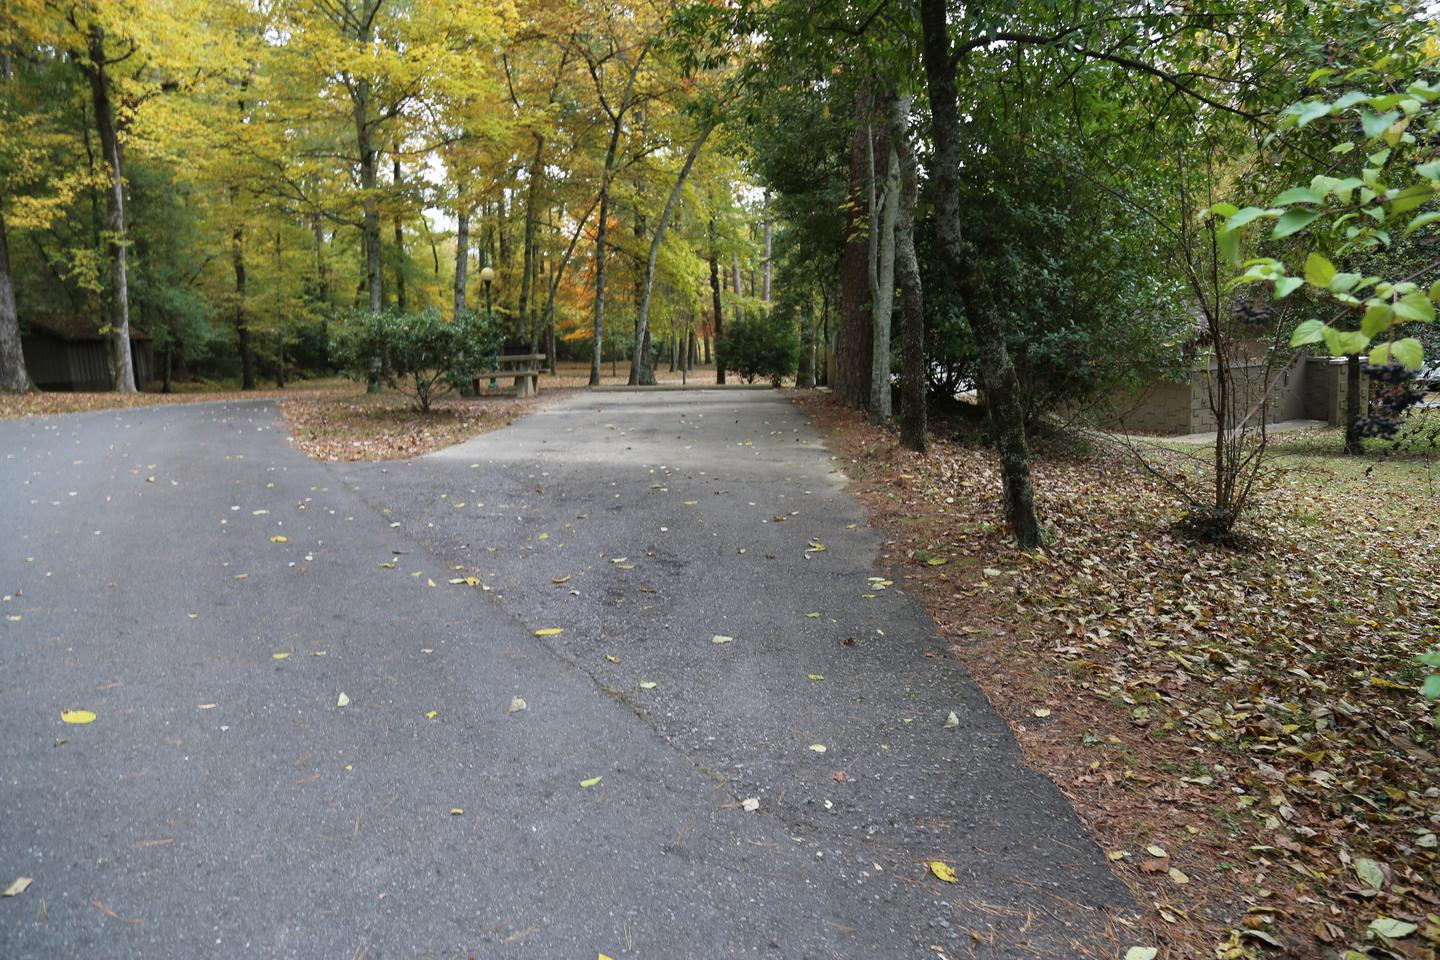 Paved road leading to paved RV campsite surrounded by treesCampsite 4